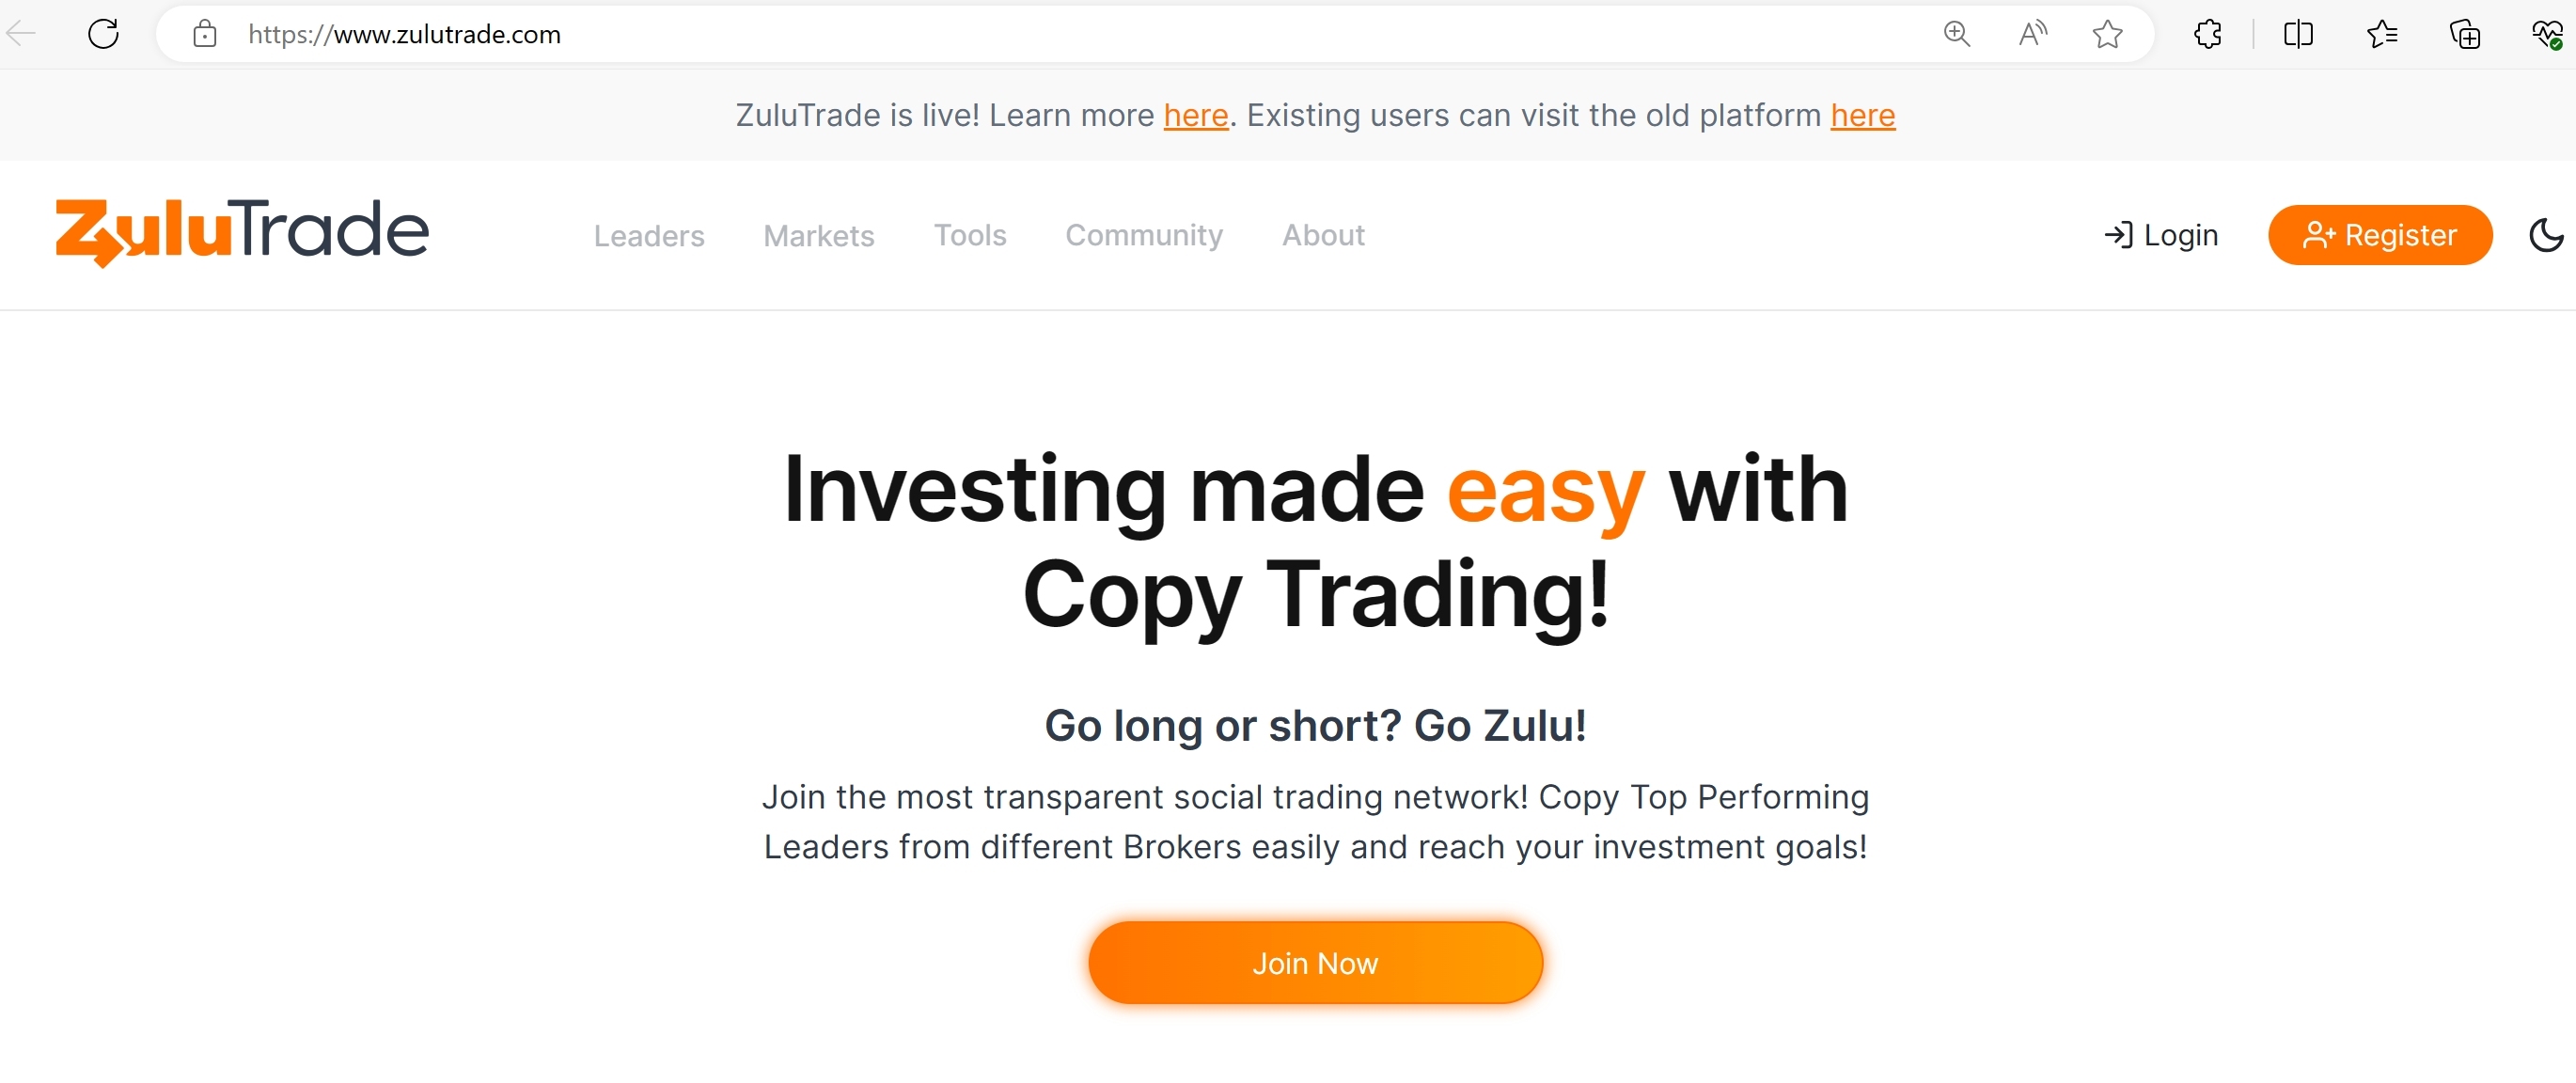 ZuluTrade automated trading